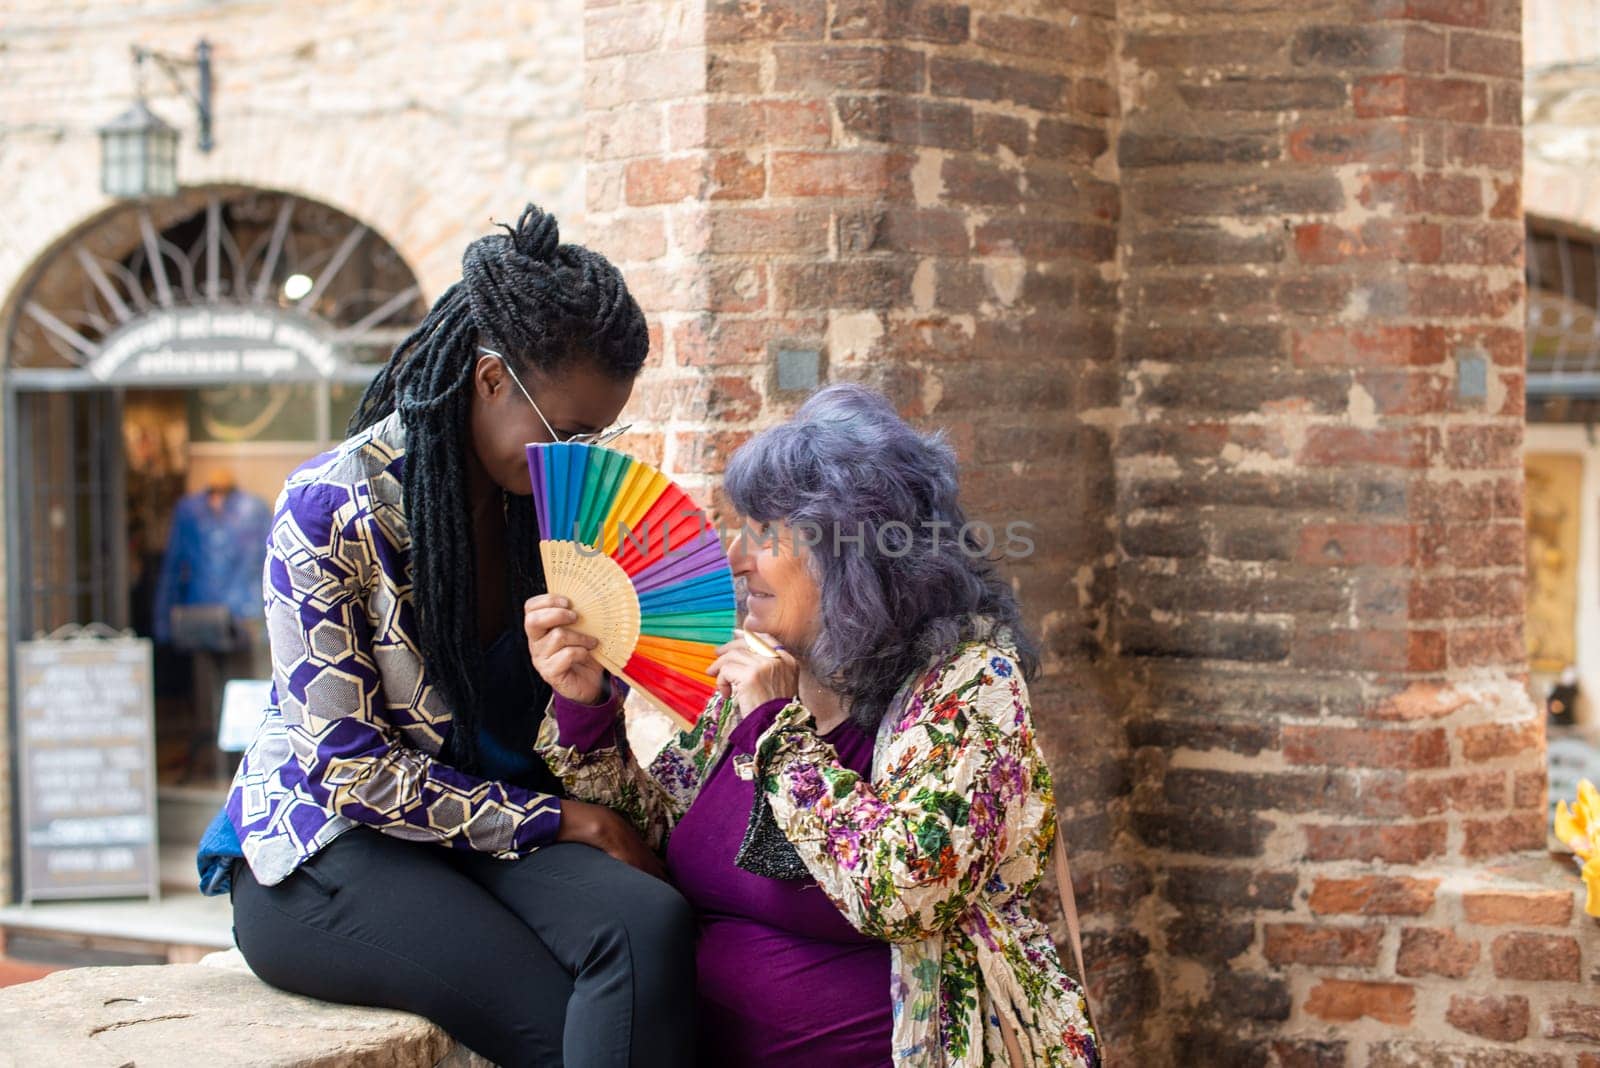 Diverse lesbian couple having fun in summertime in old village, outdoors. Funny expression. LGBT standout.